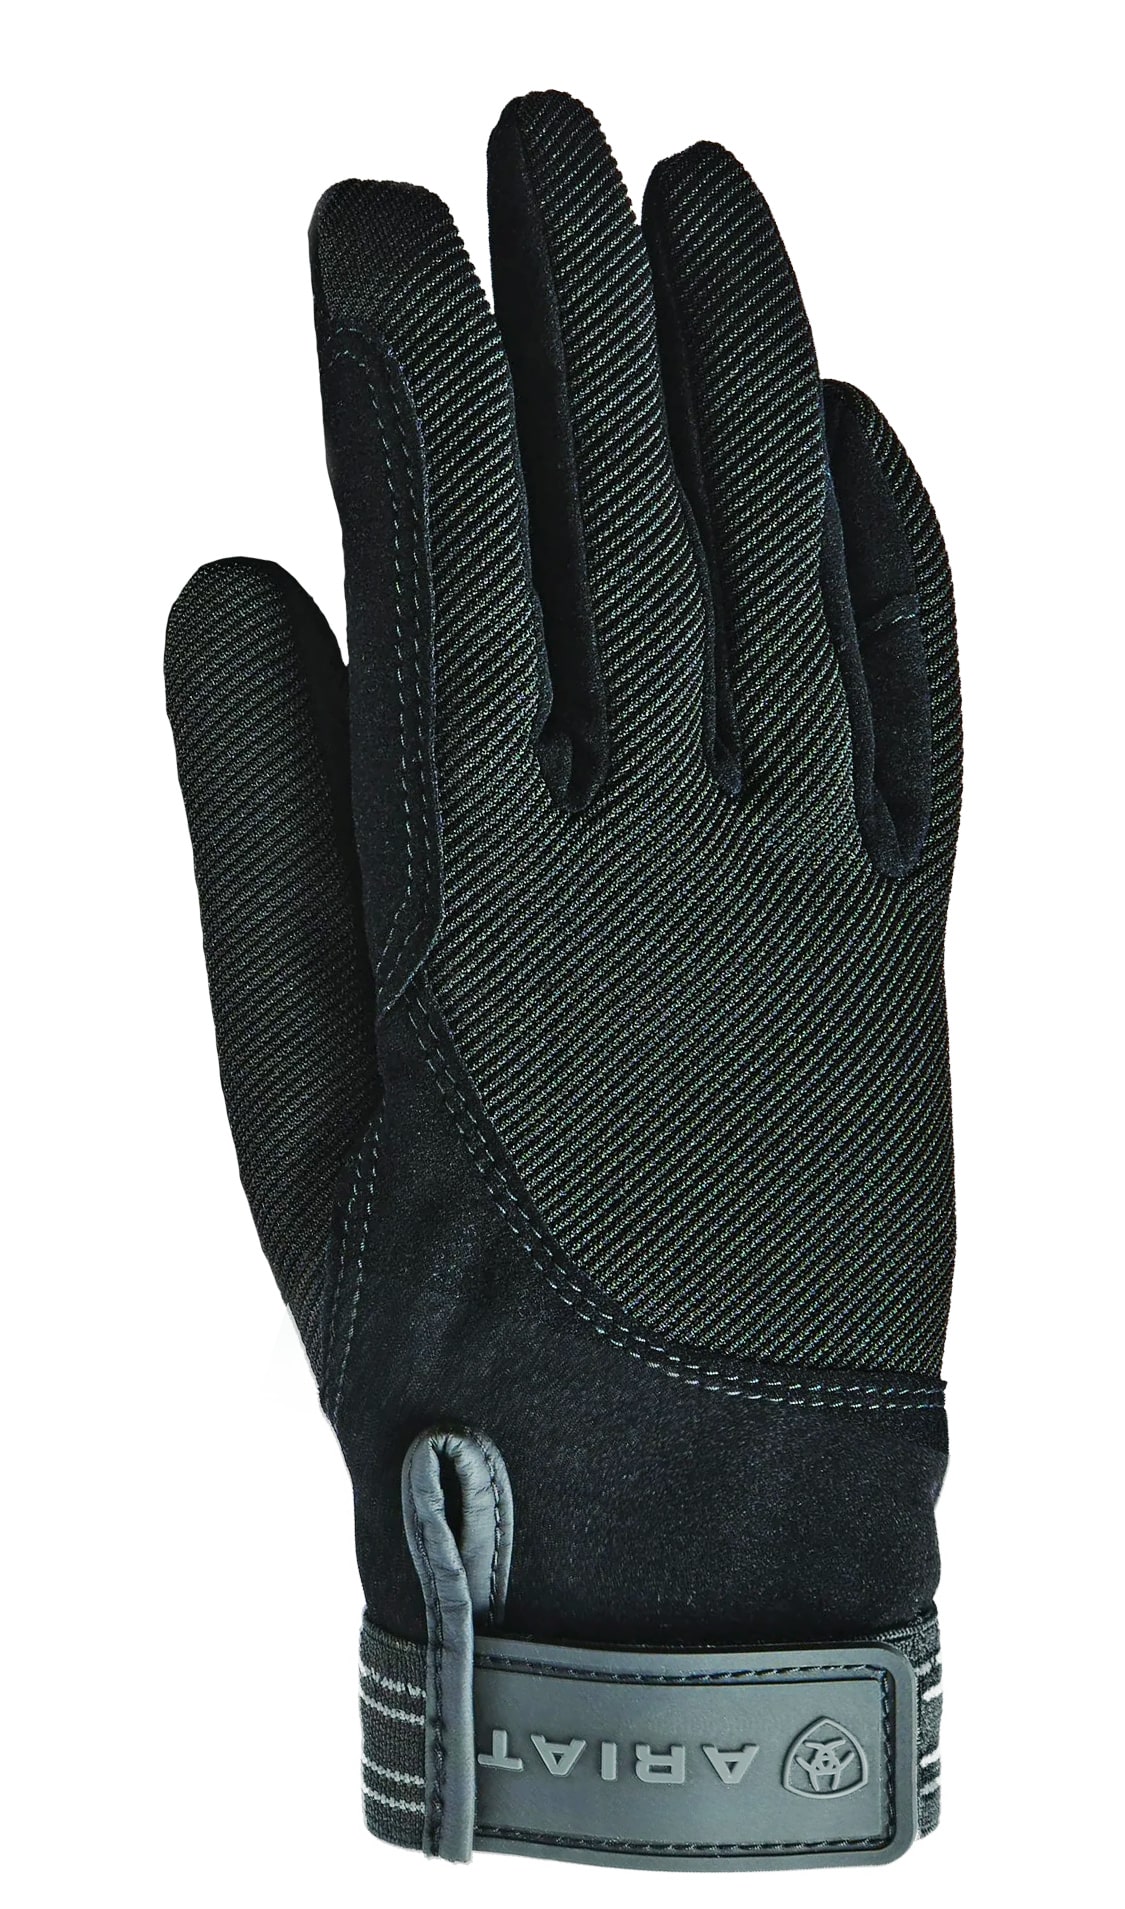 TEK Grip Gloves available from Ariat.